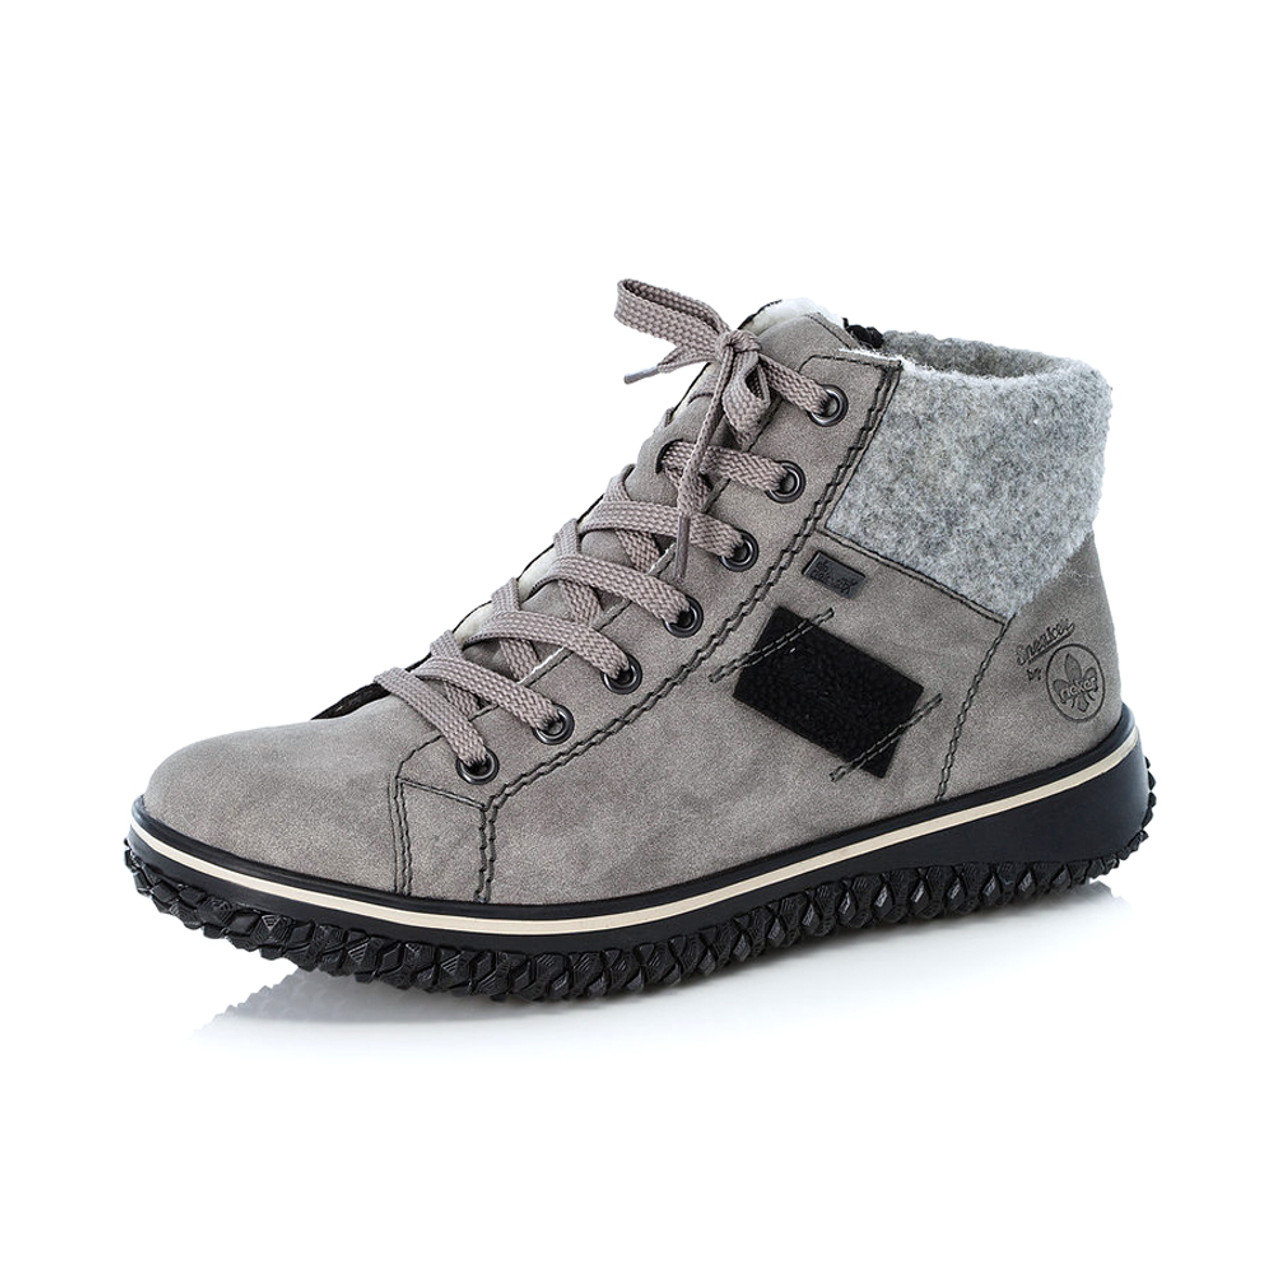 rieker grey ankle boots